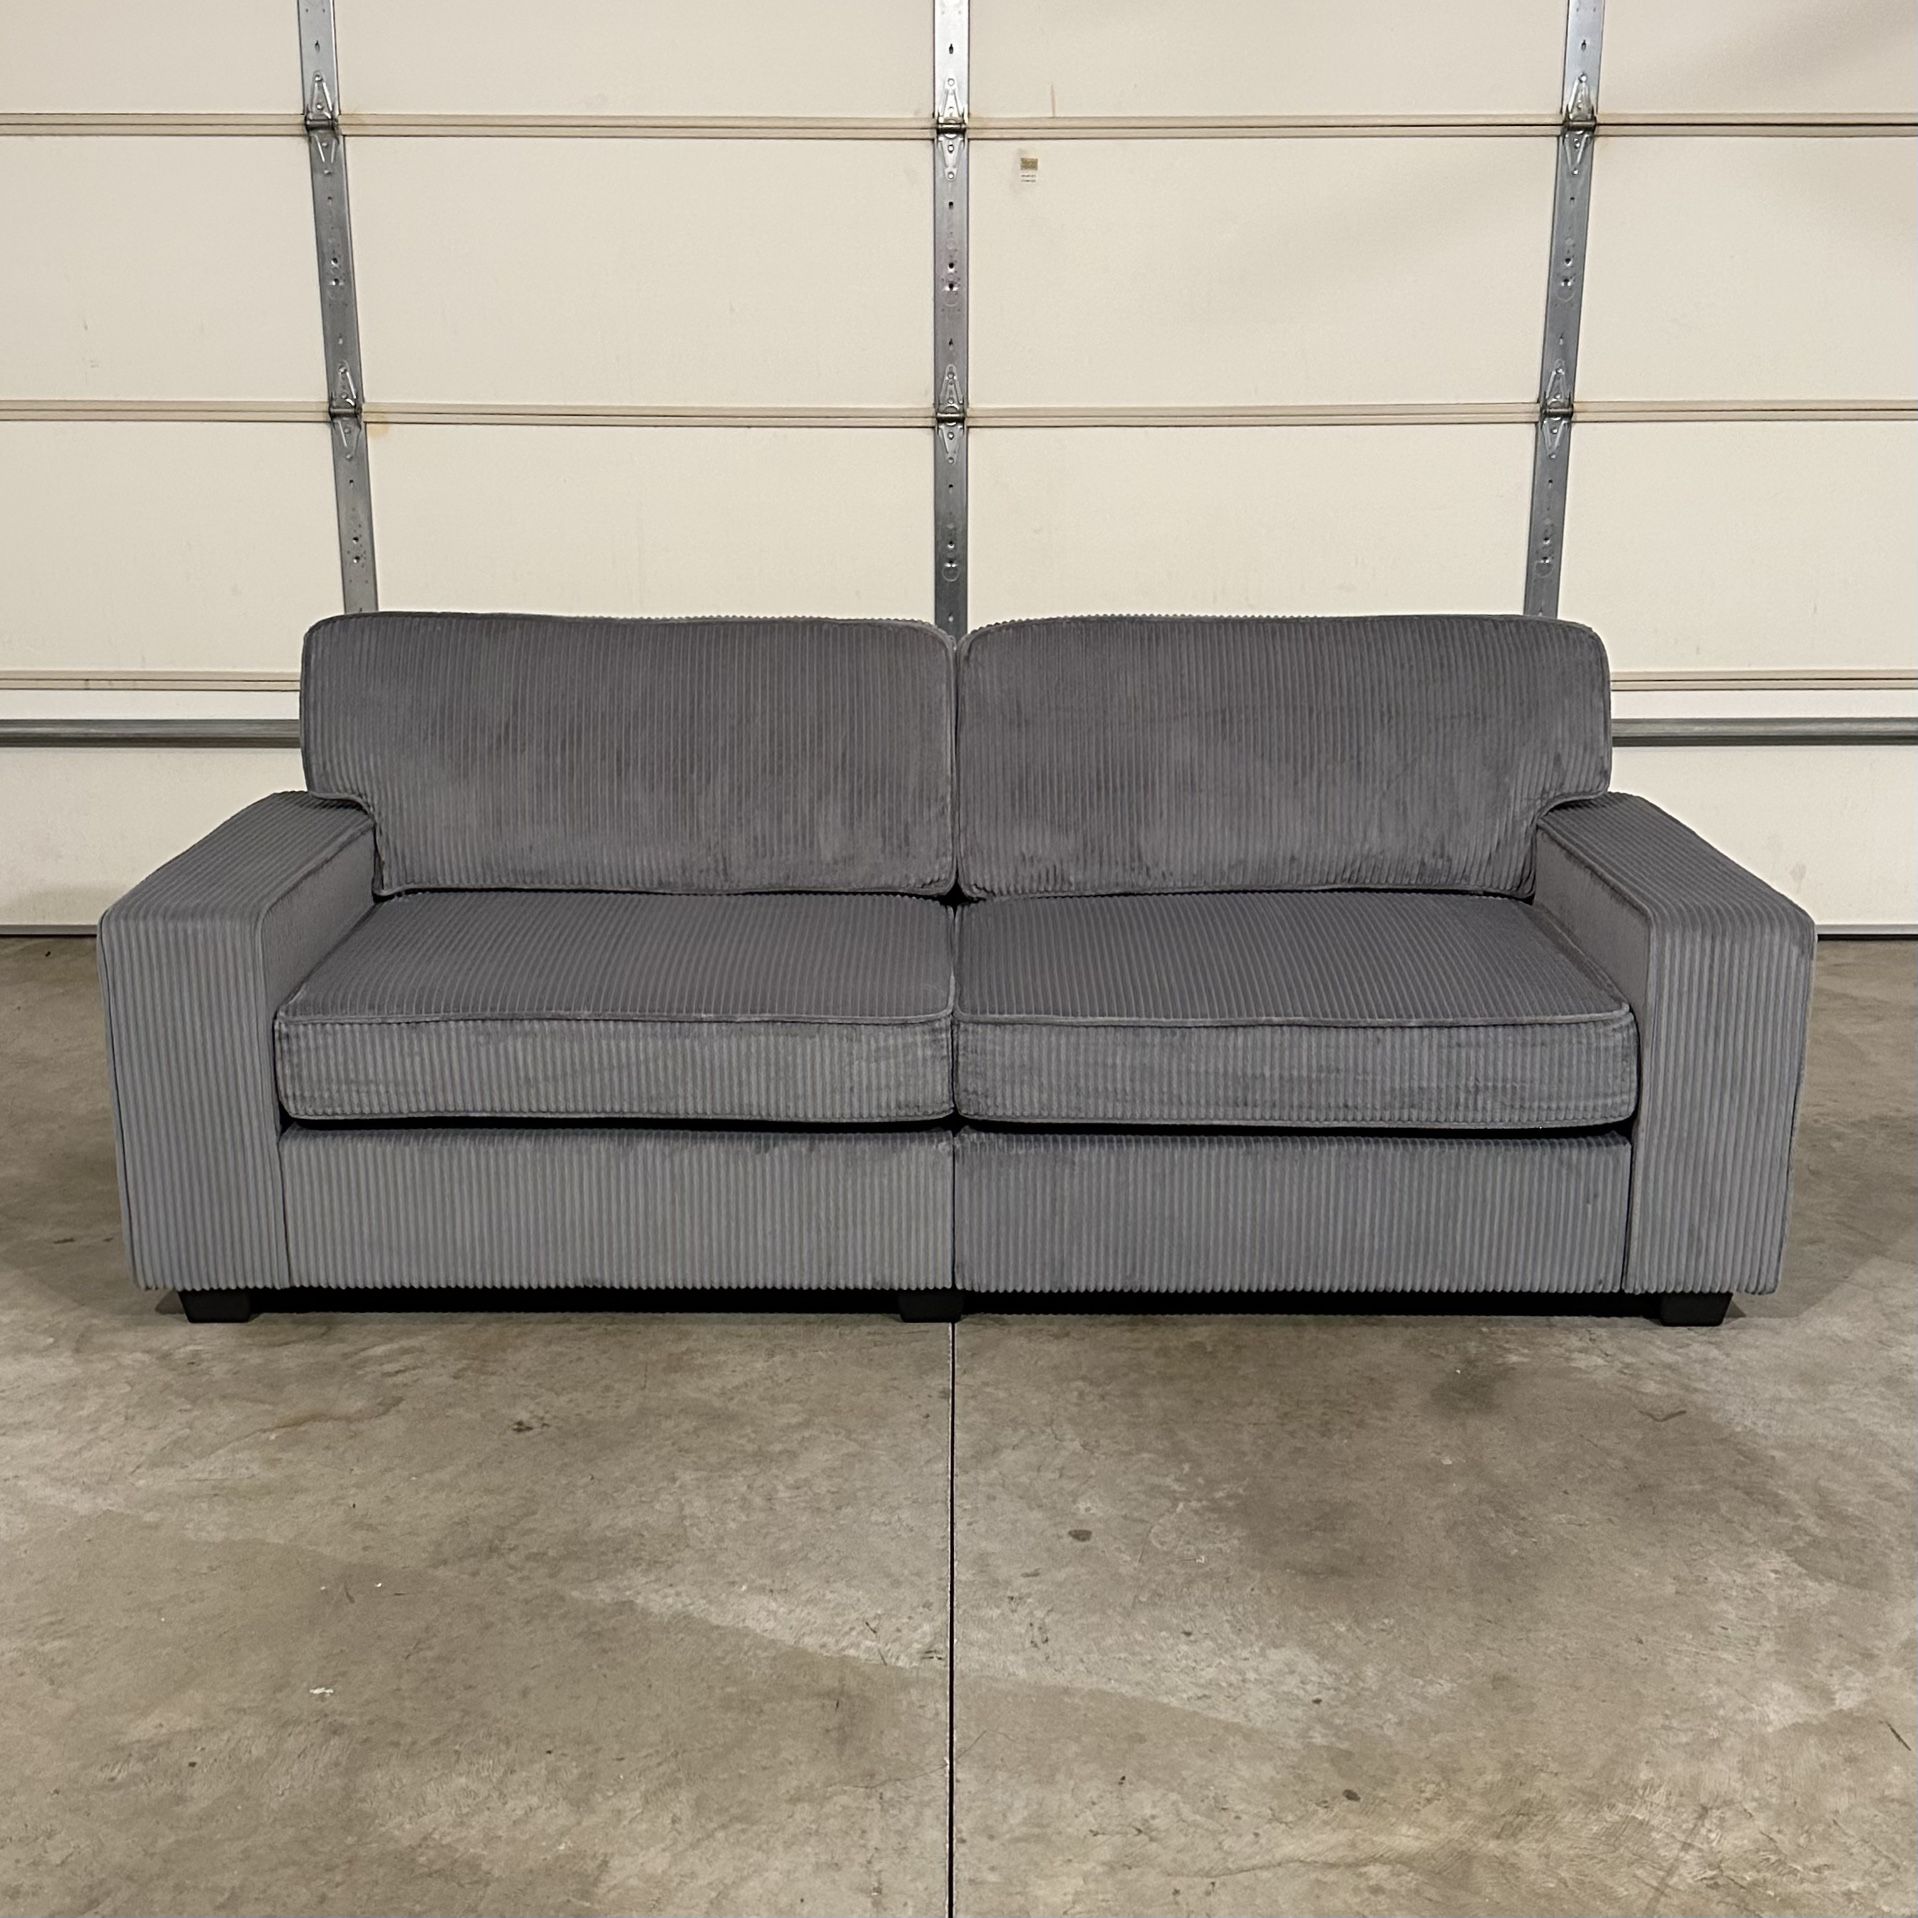 New Gray Sofa / Couch with USB Ports and Storage Pockets (Delivery Available)